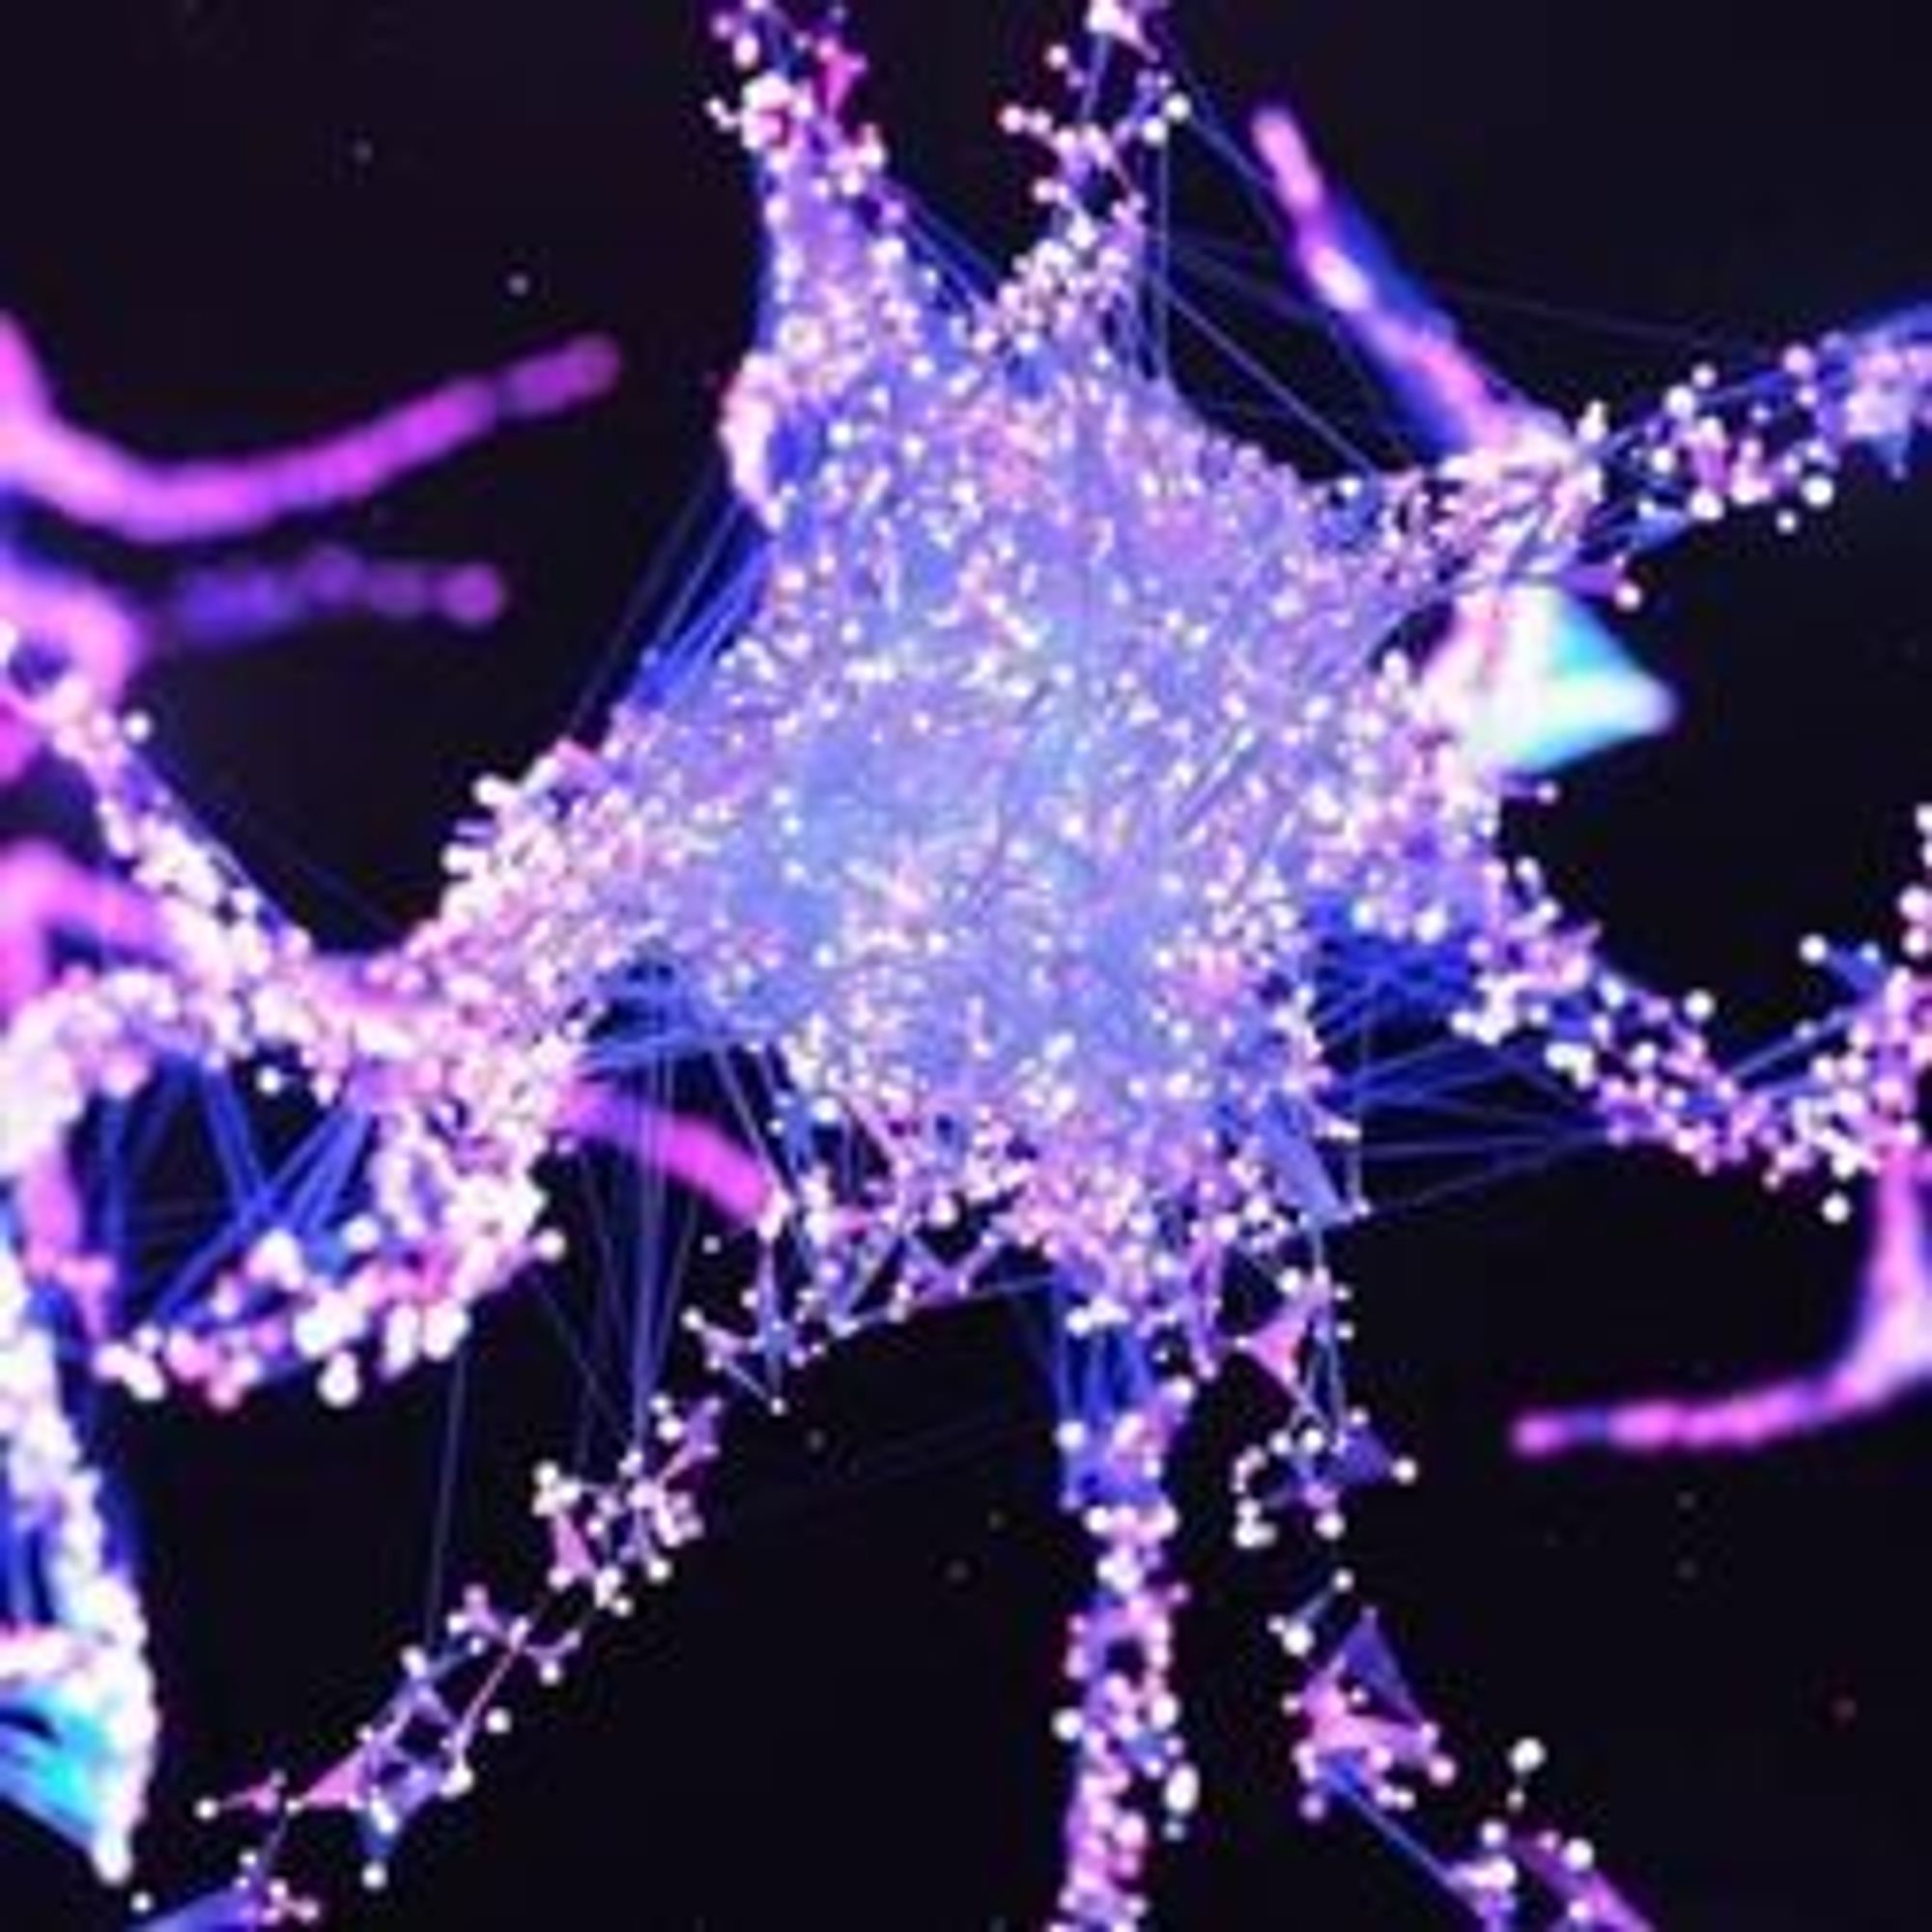 Artificial Neuron Swaps Dopamine with Rat Brain Cells Like a Real One | News | Communications of the ACM